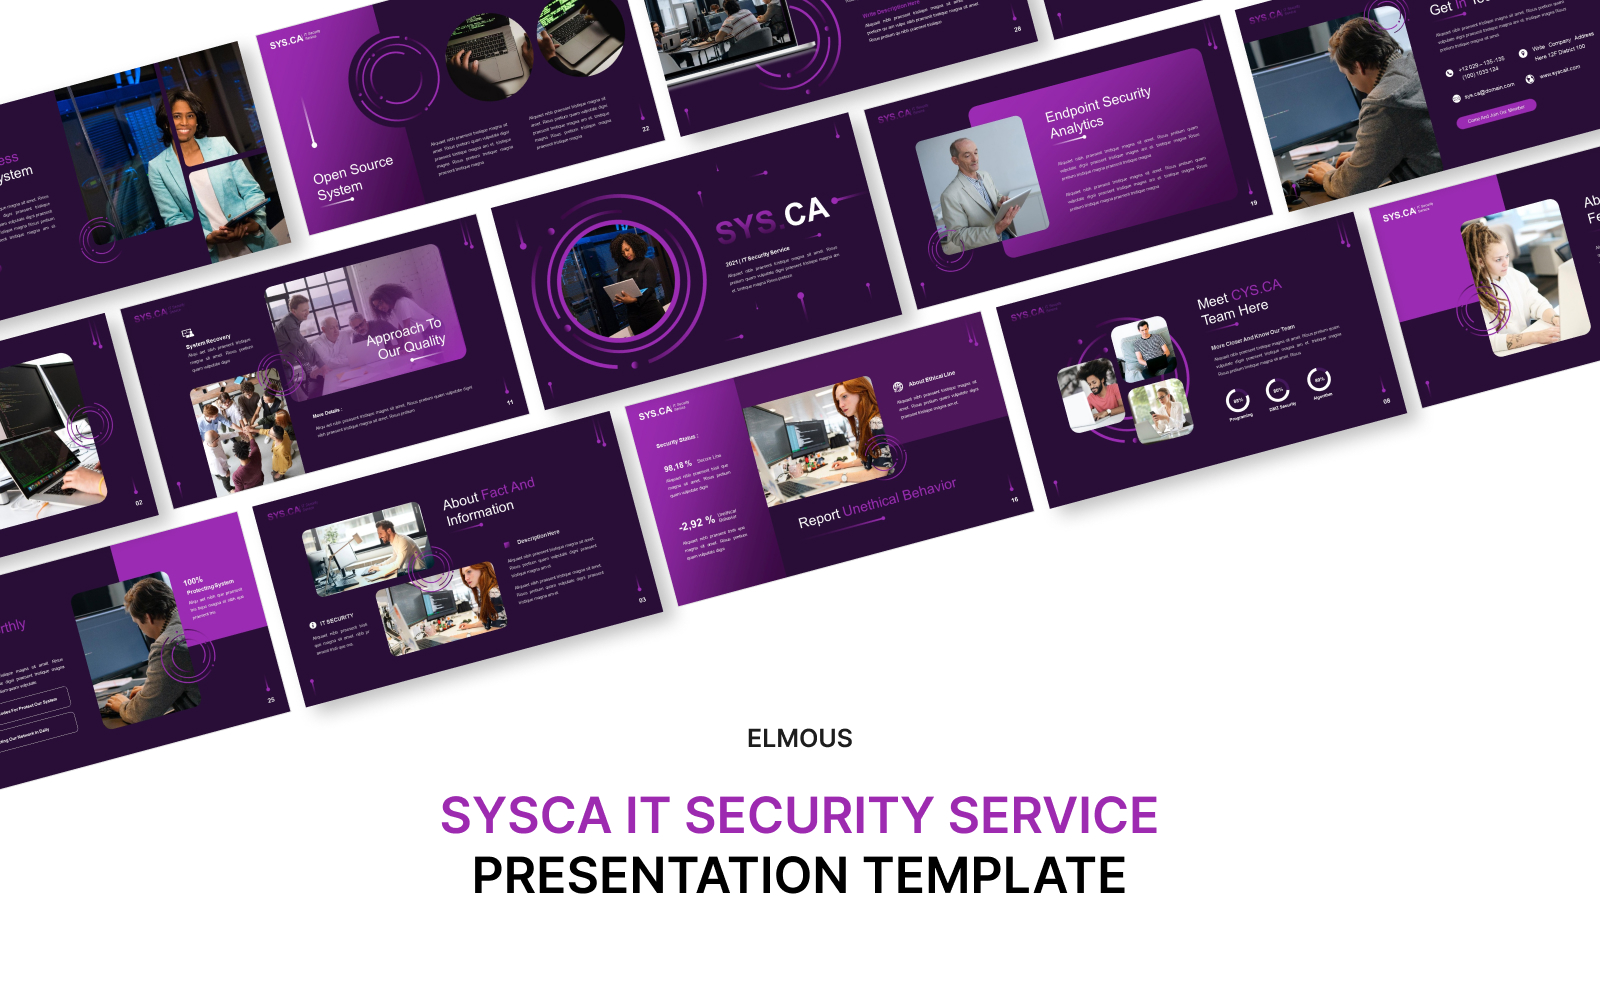 Sysca IT Security Service Powerpoint Presentation Template